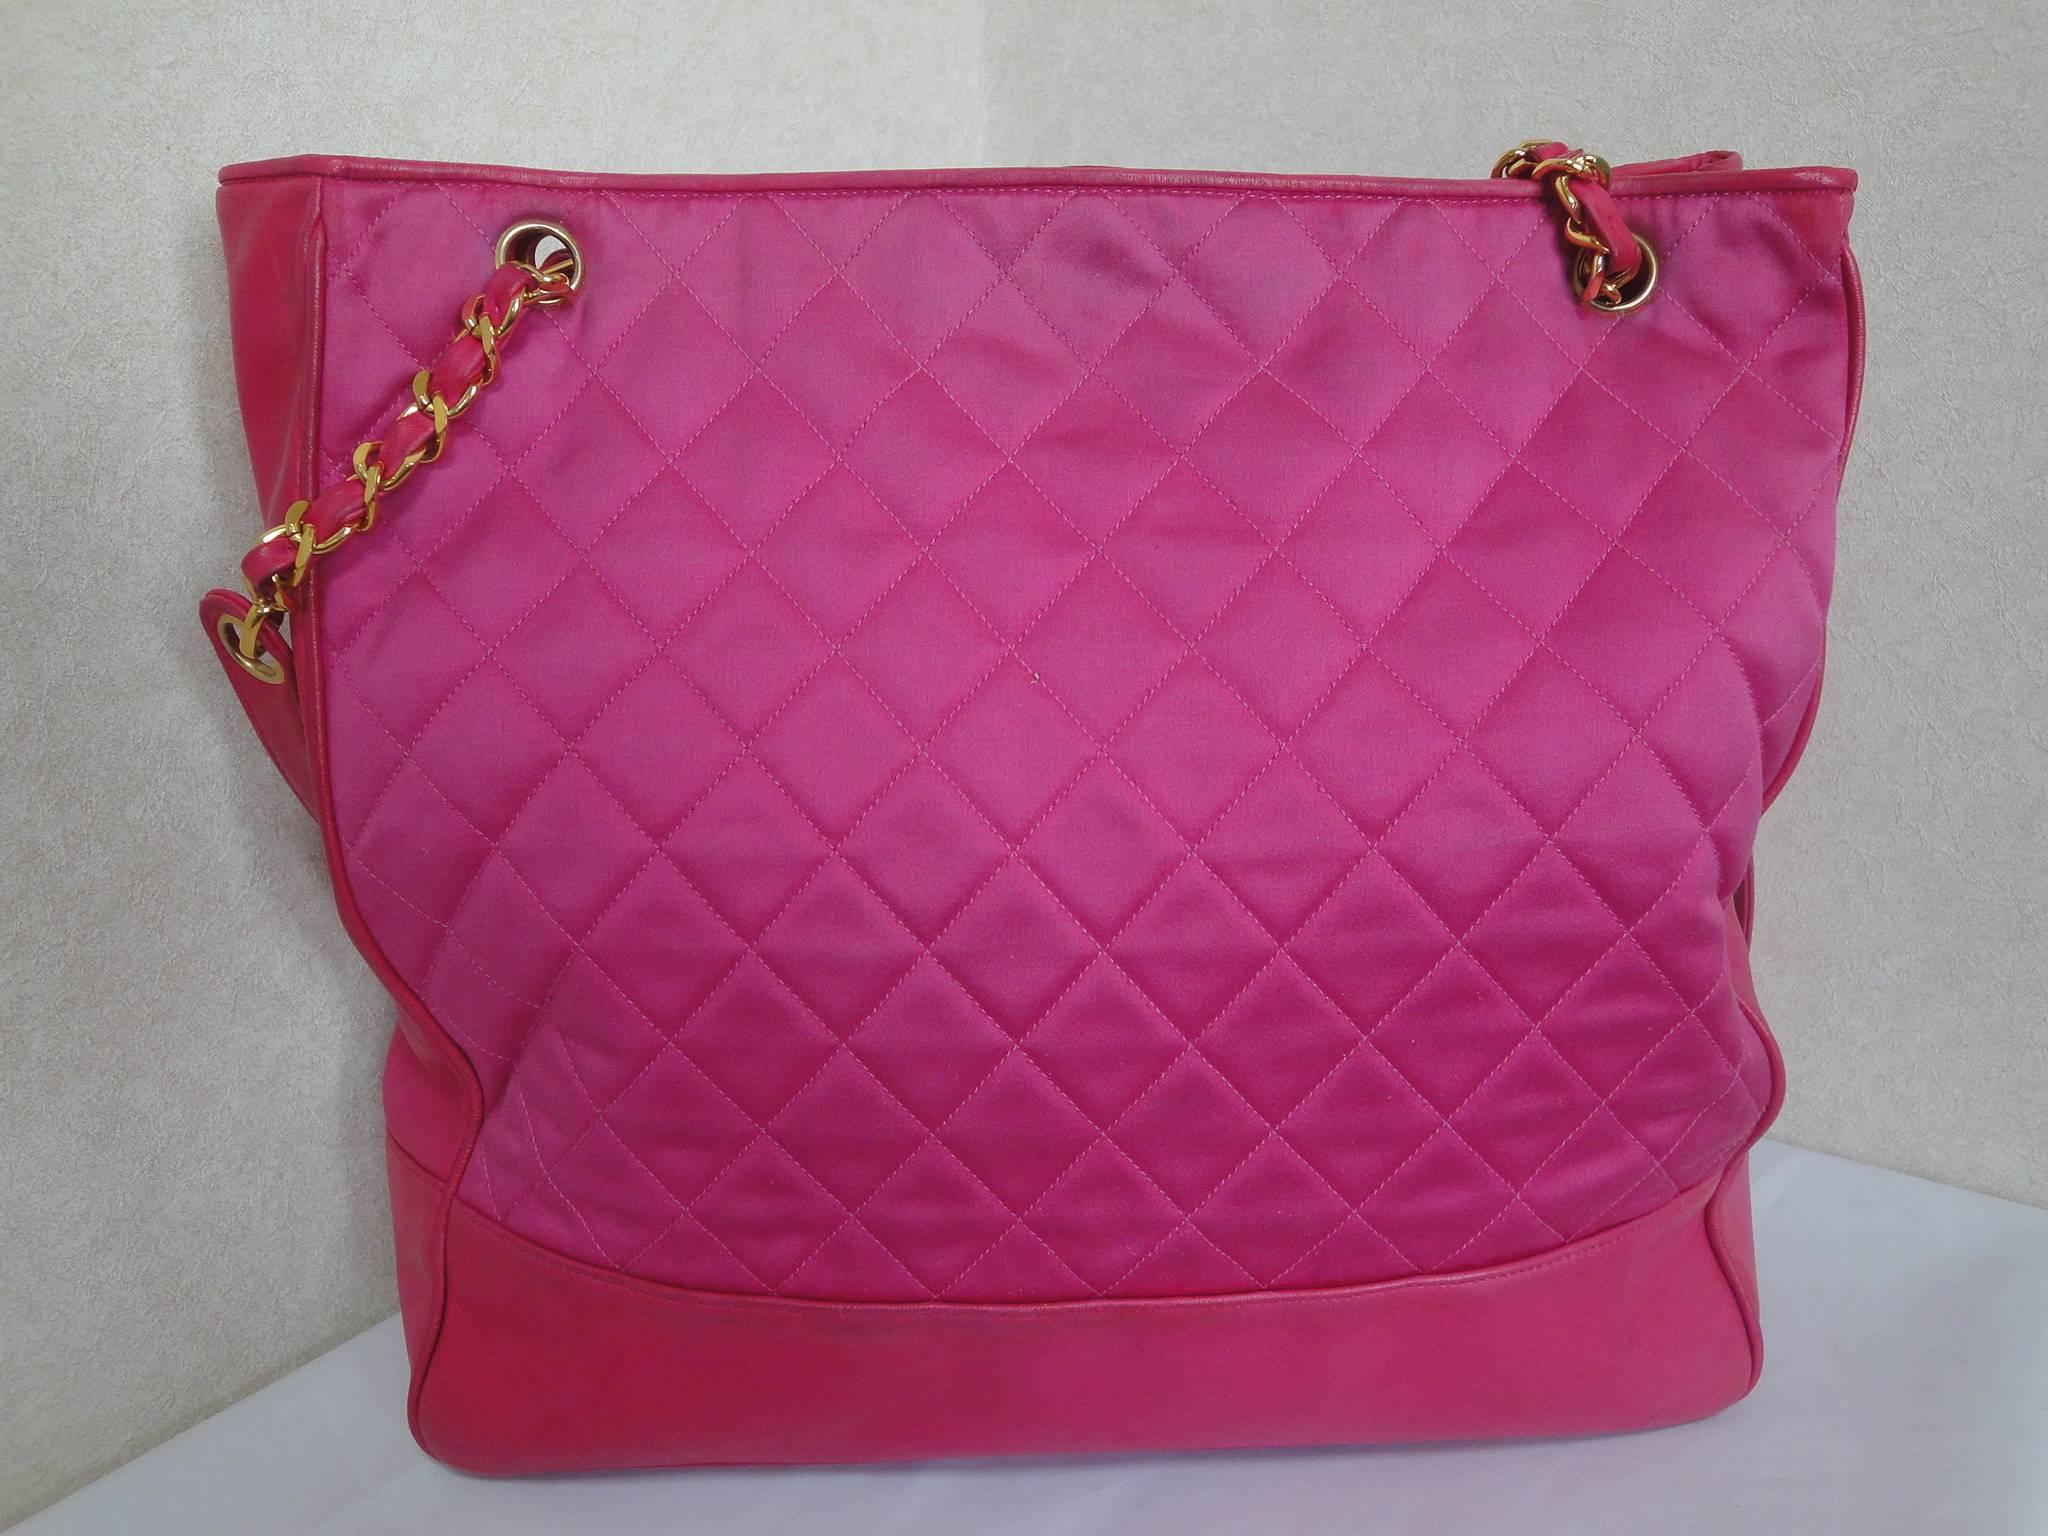 Vintage CHANEL bright pink chain shoulder tote bag with quilted satin and calfskin combo. Gold tone CC ball charm. Hot, think spring

This is a vintage hot pink large tote bag with gold chain straps from Chanel in the 90s.
Rare color for the